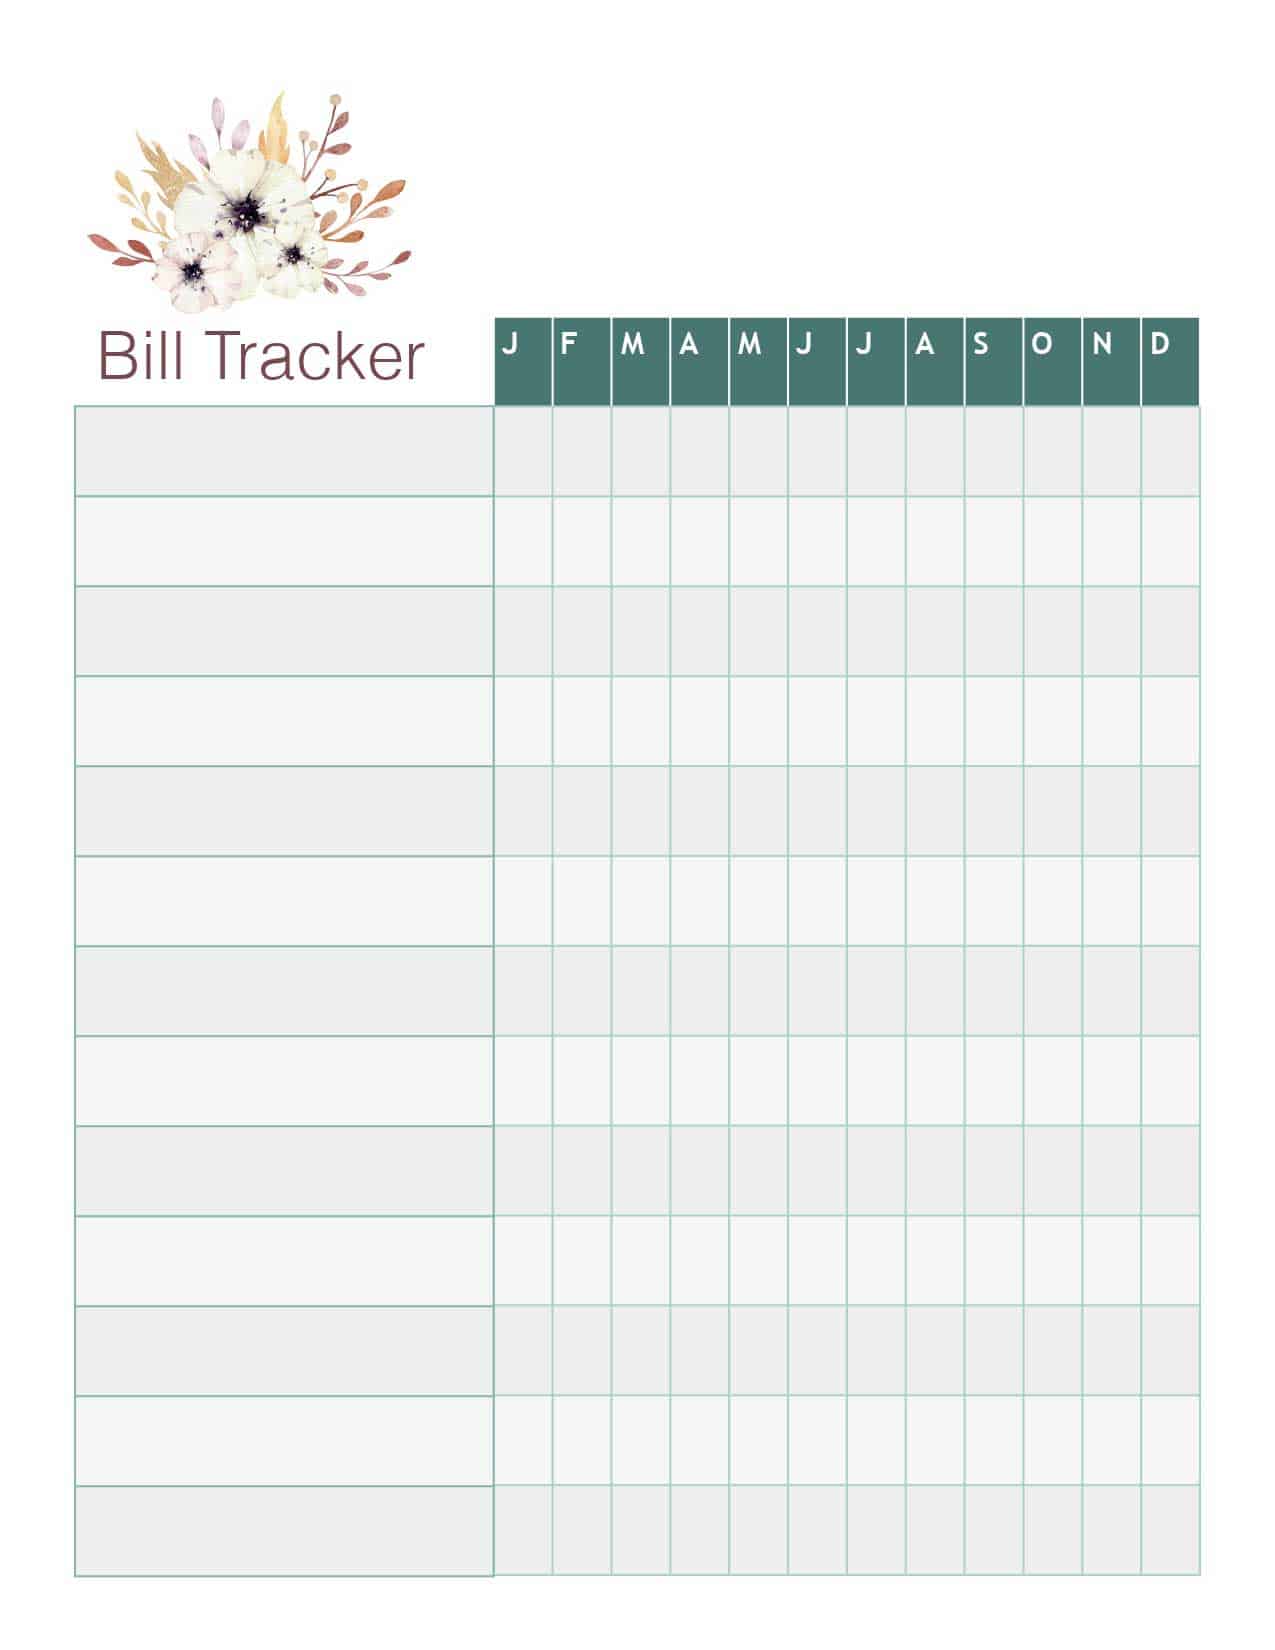 Keep track of your monthly bills with this free floral themed printable